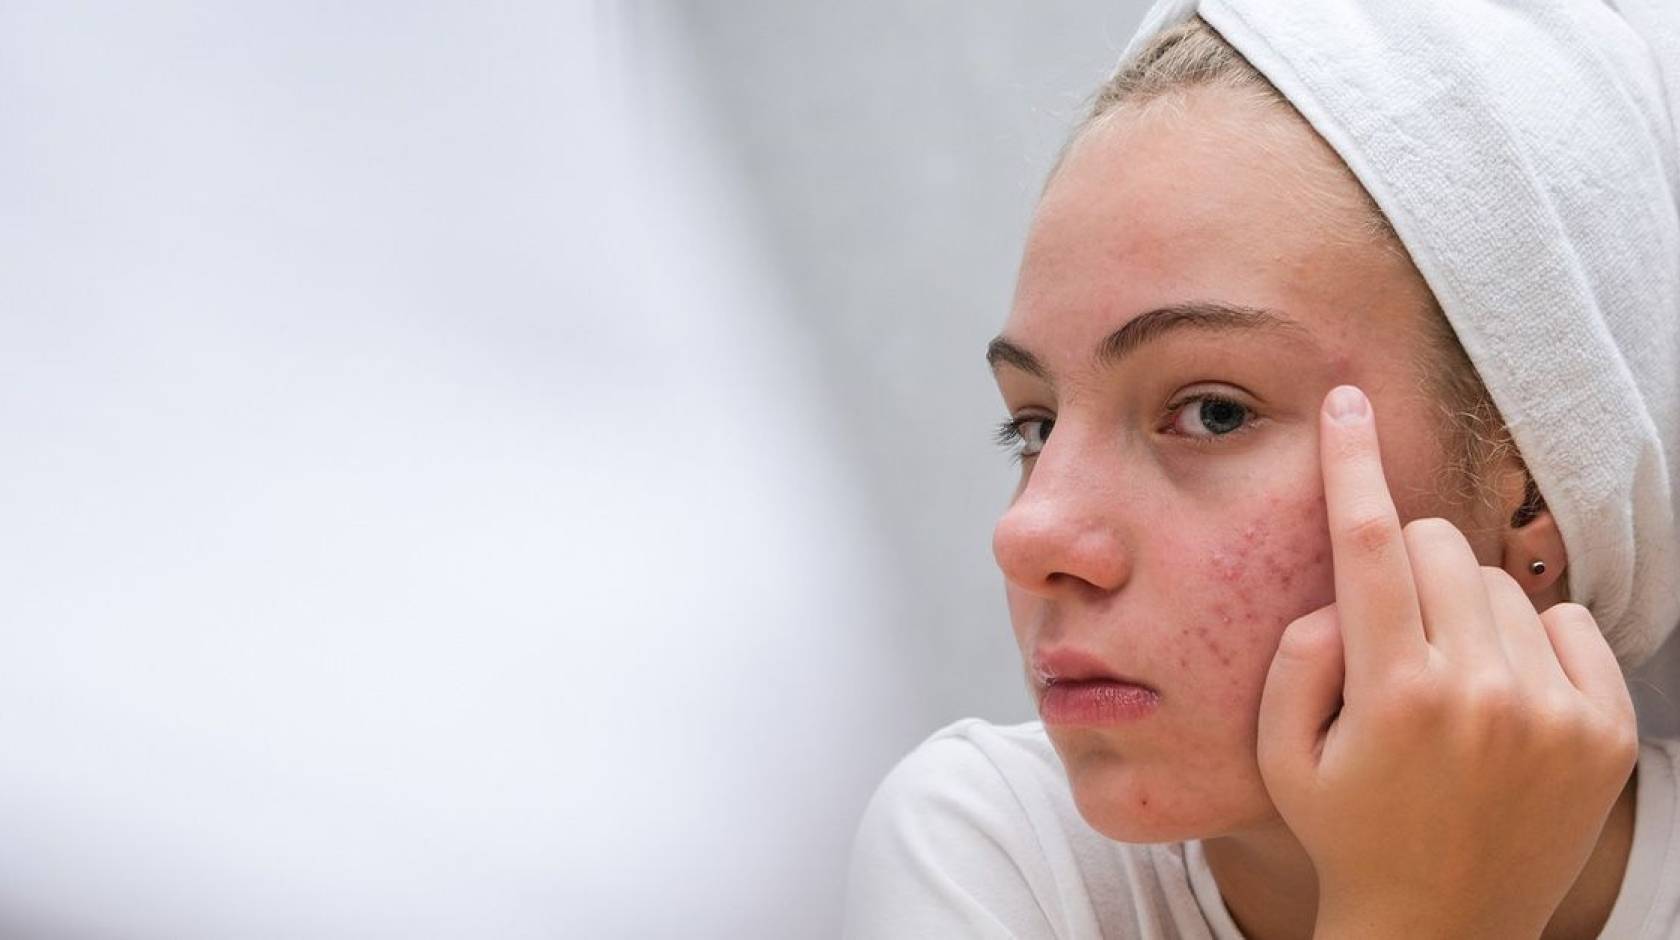 A teen girl with a white towel wrapped around her head and pimples on her face touches her face near her eye